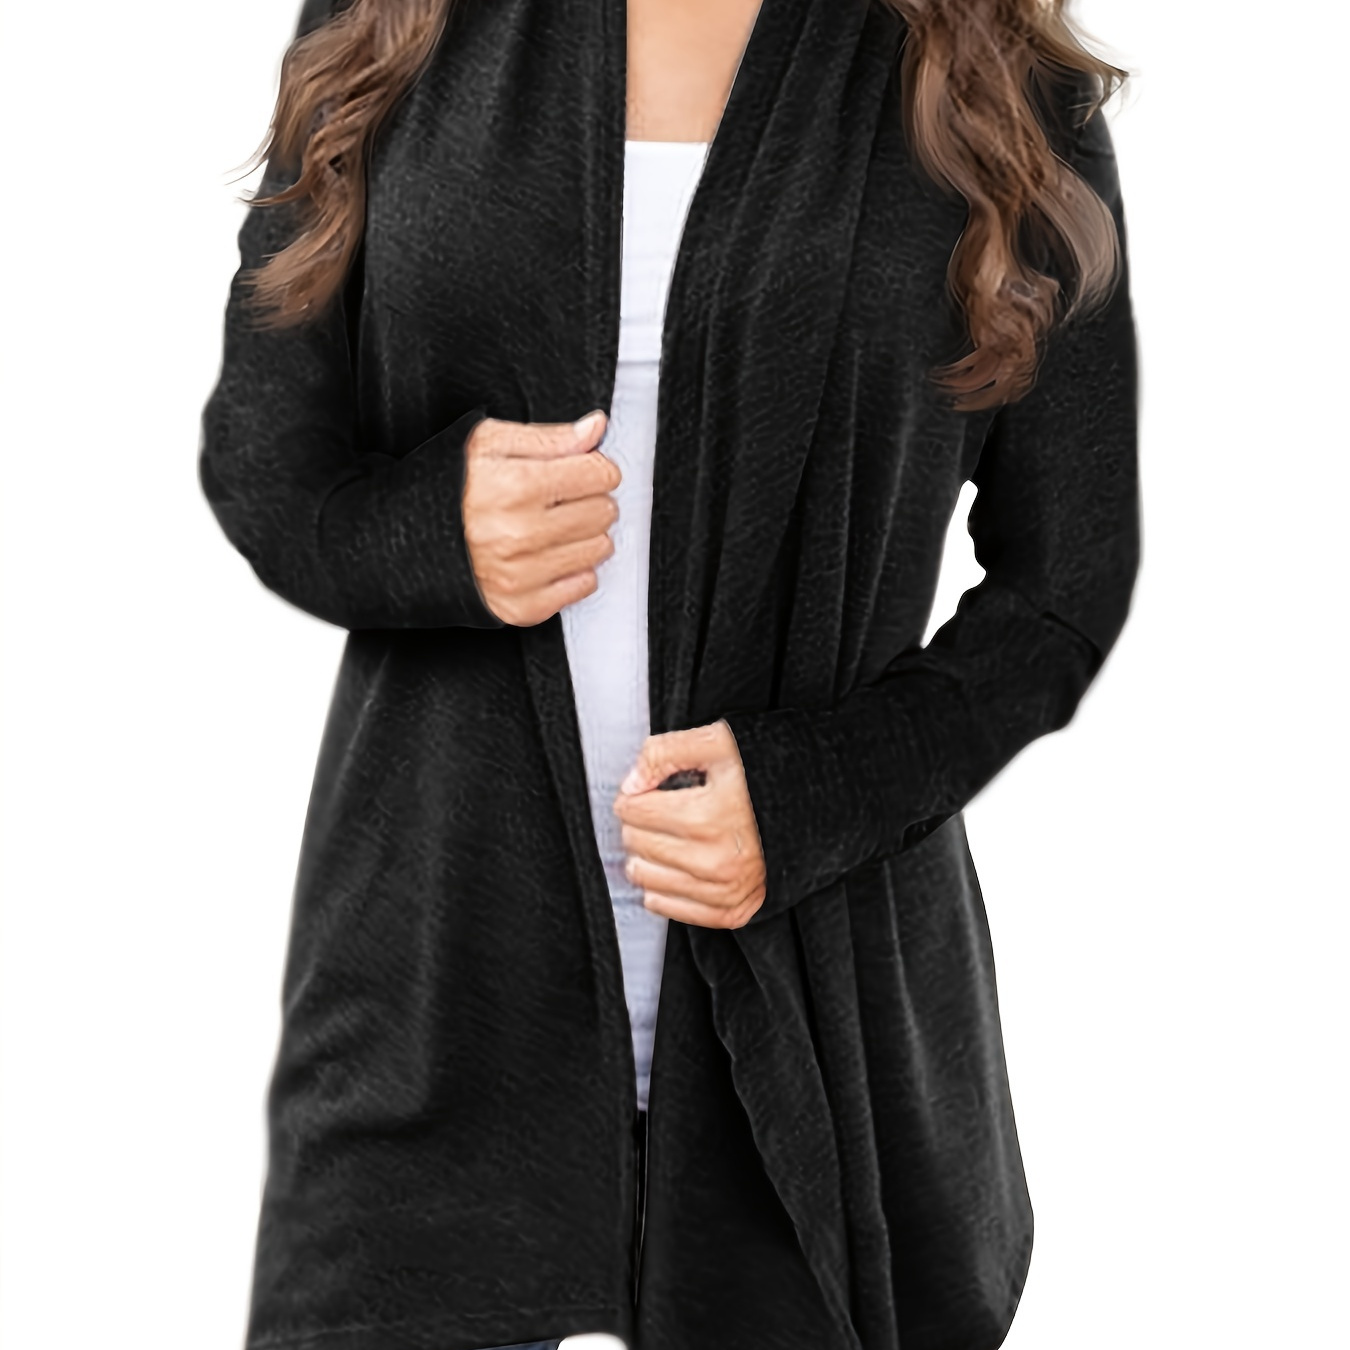 

Long Sleeve Cardigan, Casual Every Day Sweater For Spring & Fall, Women's Clothing